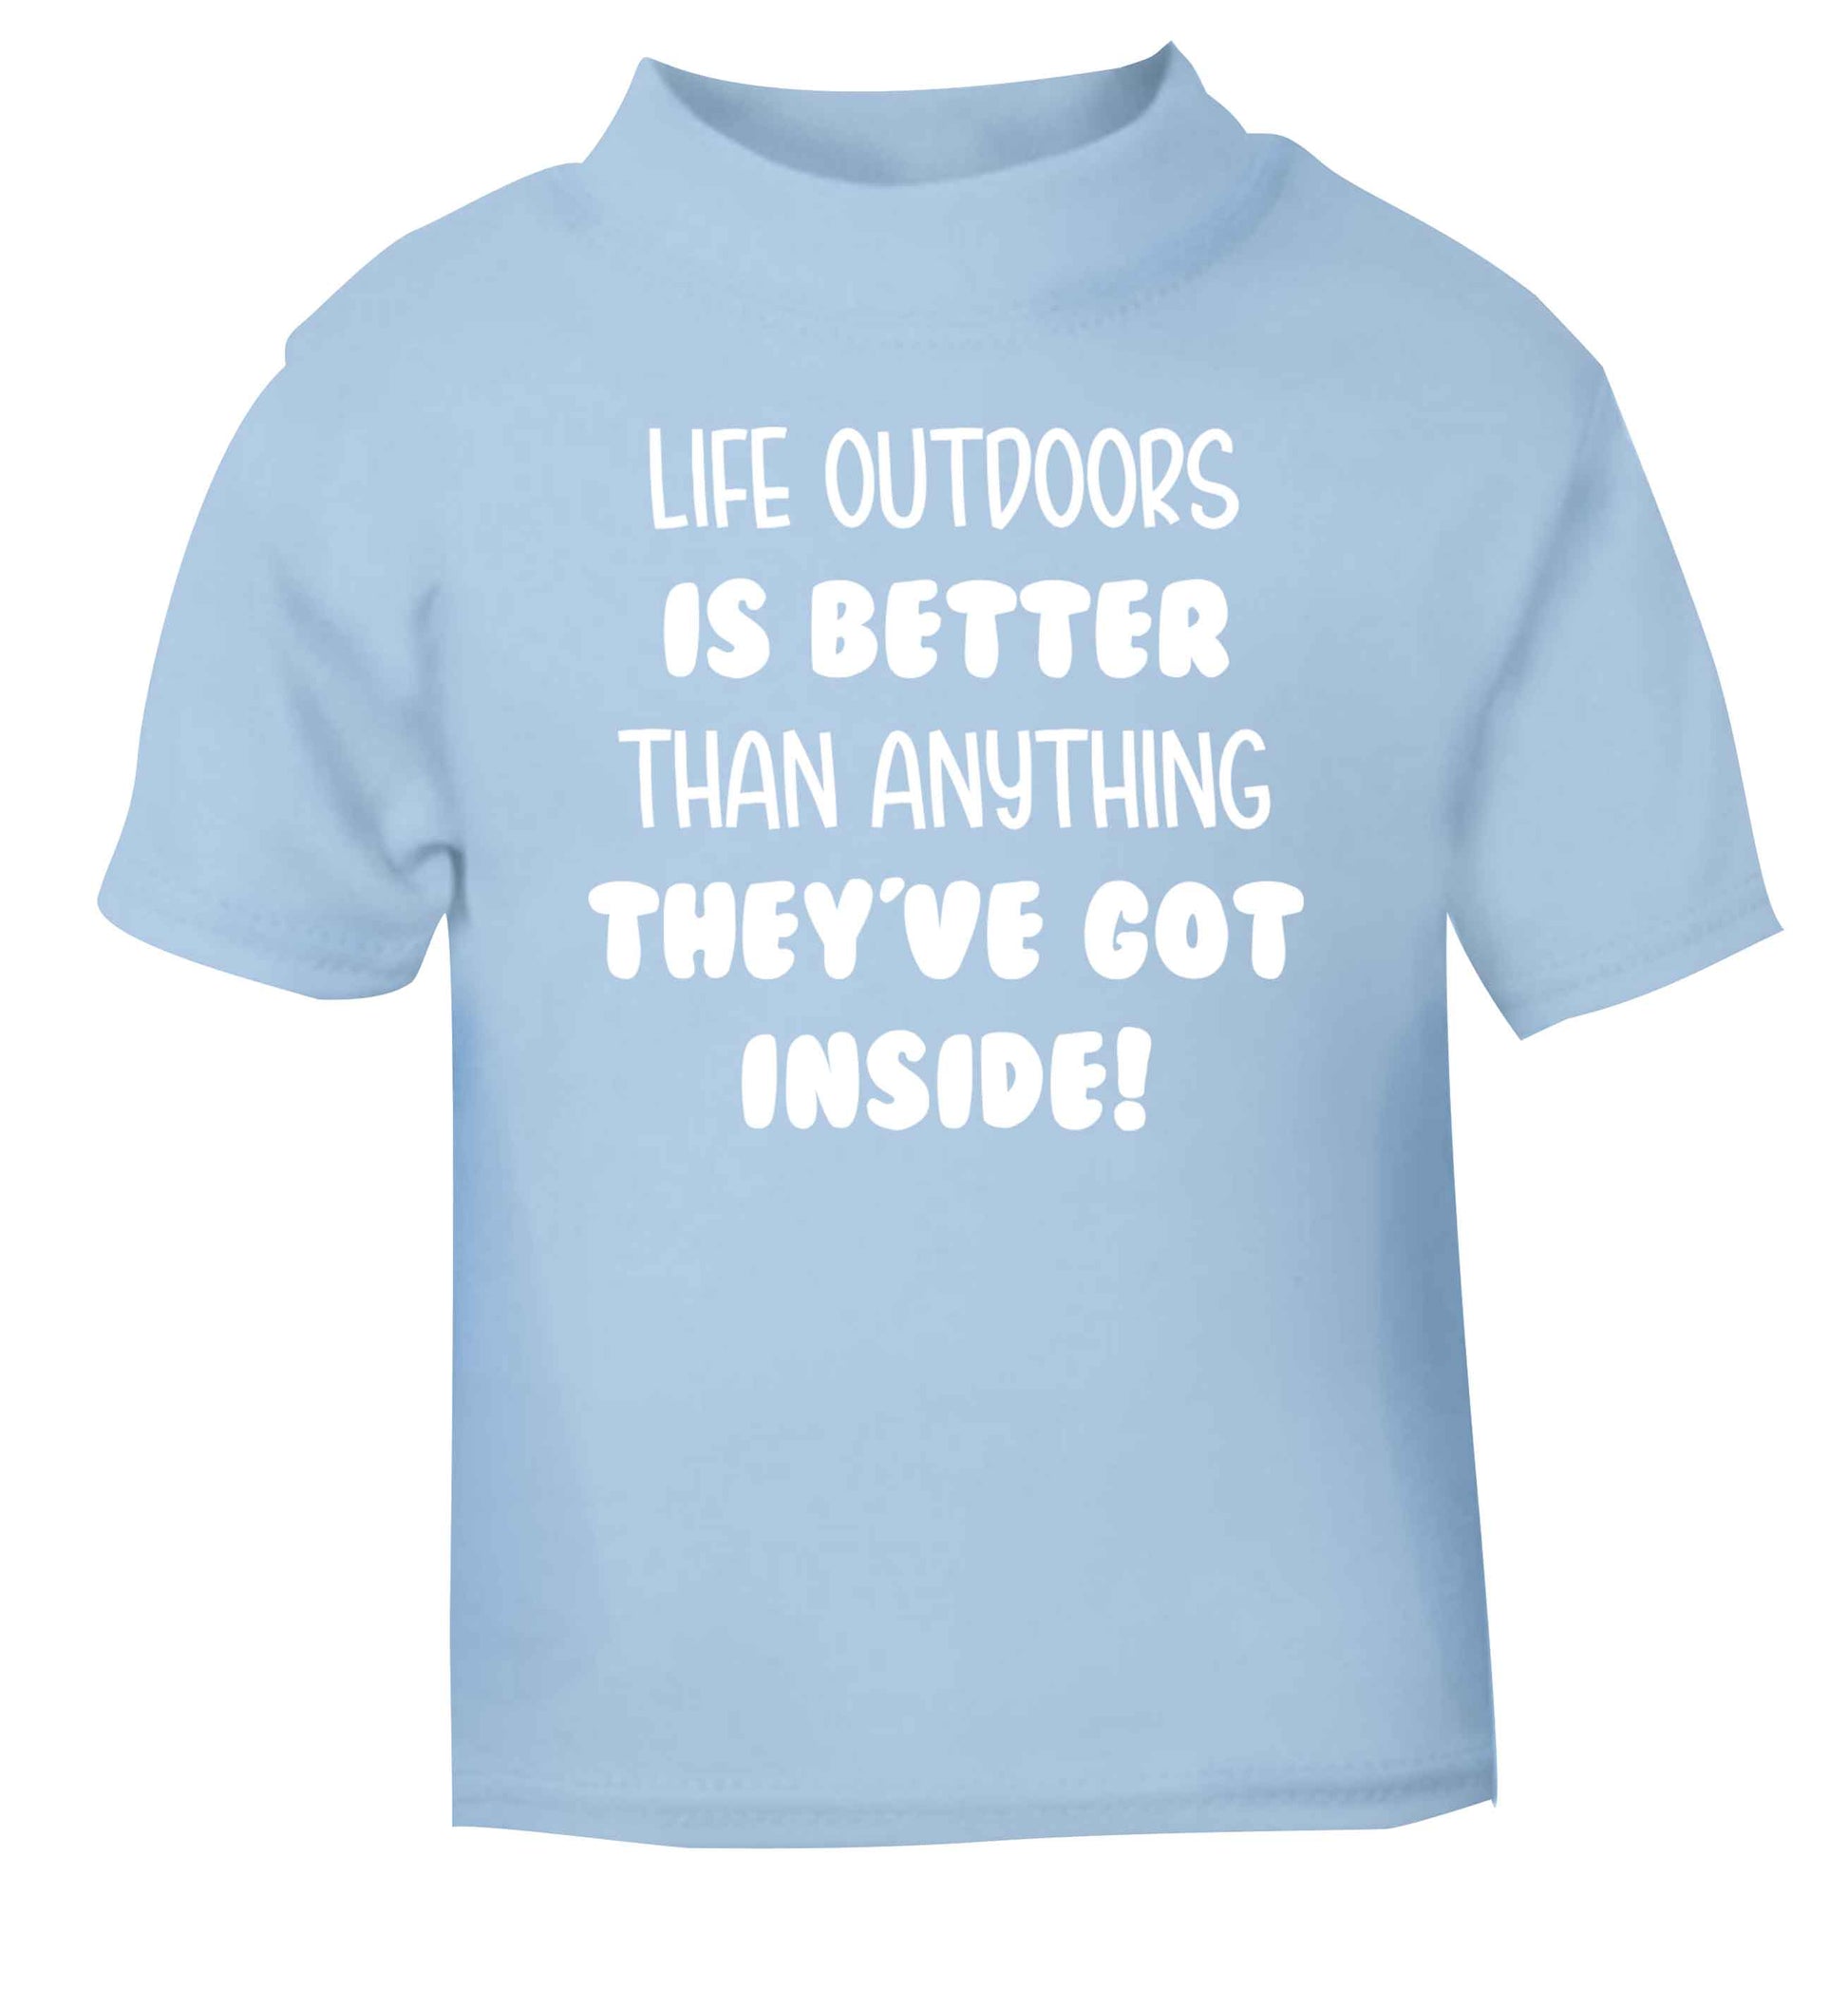 Life outdoors is better than anything they've go inside light blue Baby Toddler Tshirt 2 Years